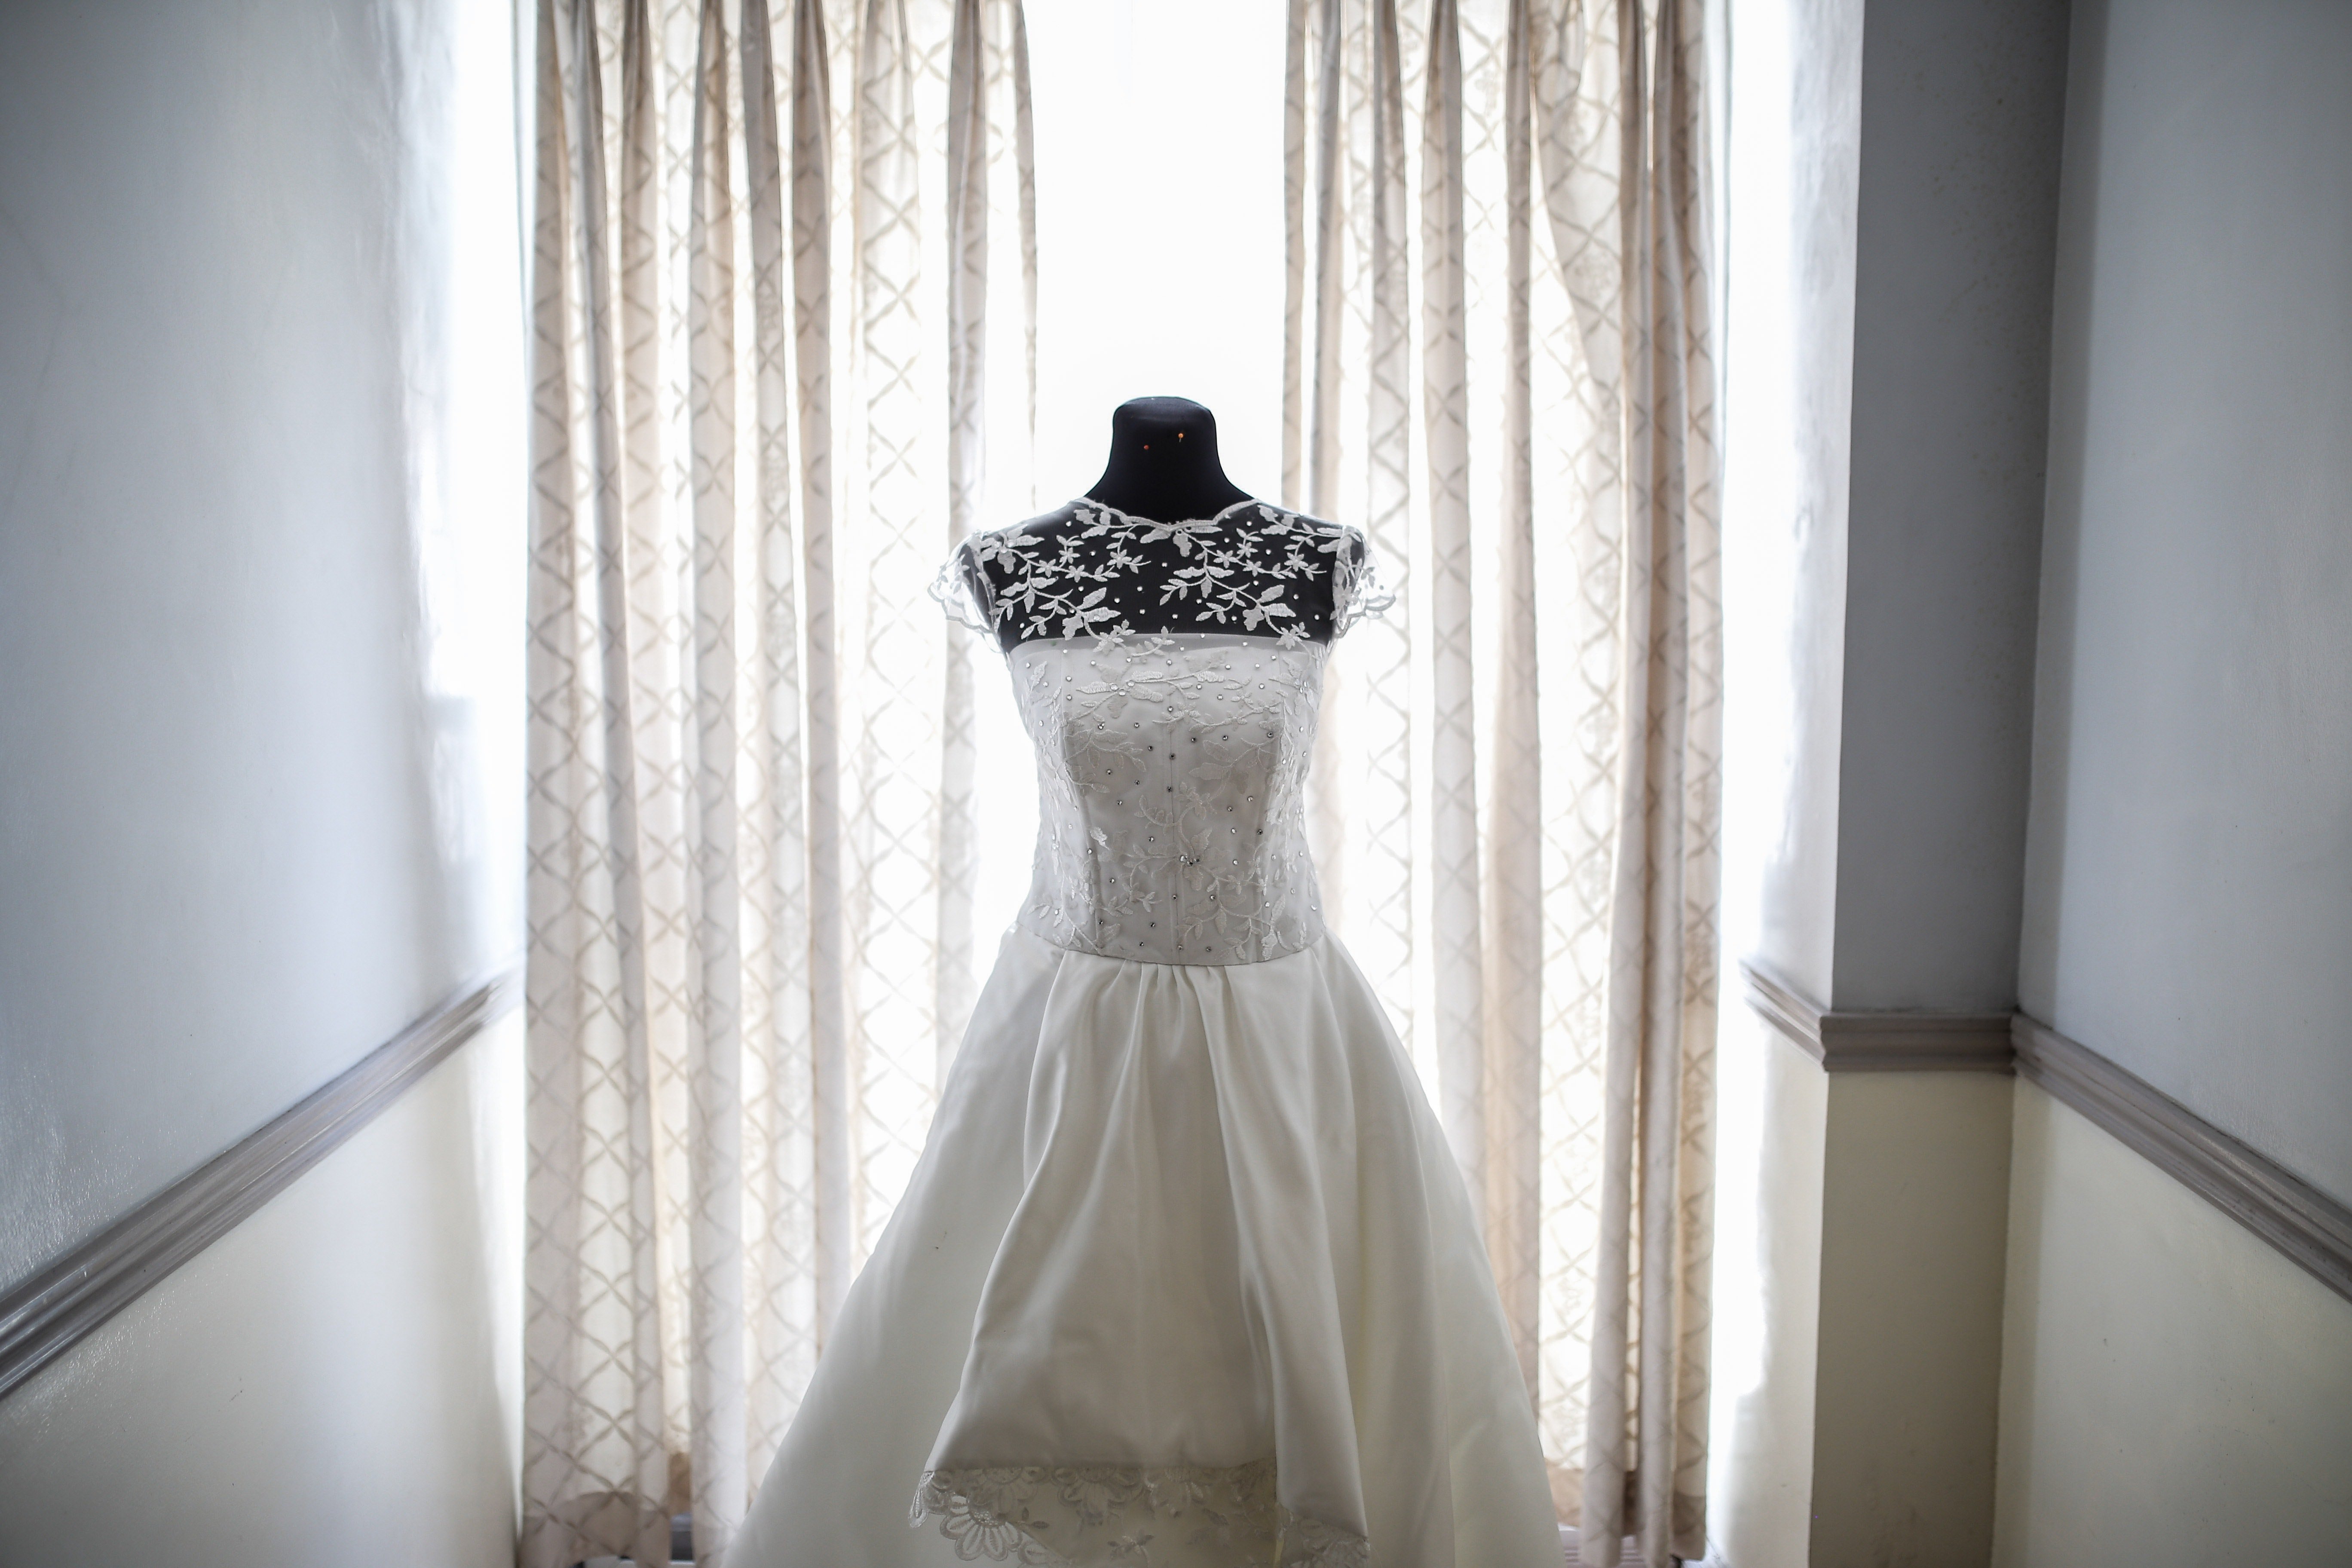 A bridal gown shown on display | Source: Pexels